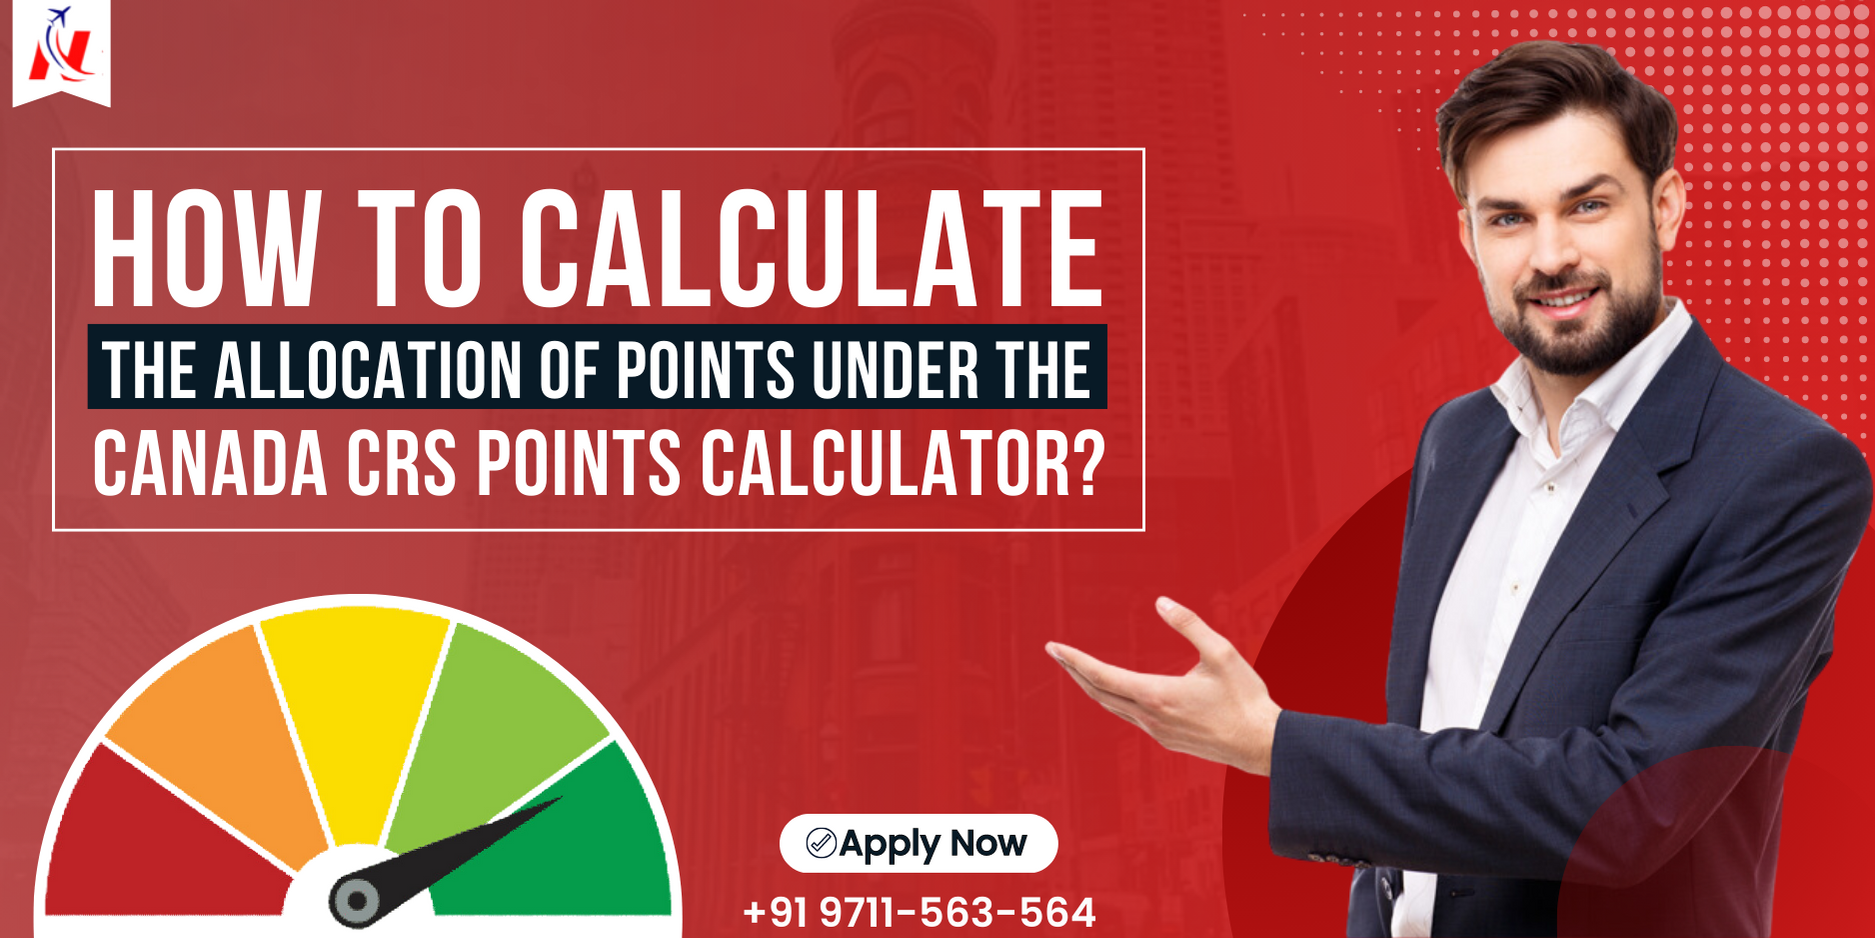 How to calculate the allocation of points under the Canada CRS Points Calculator?